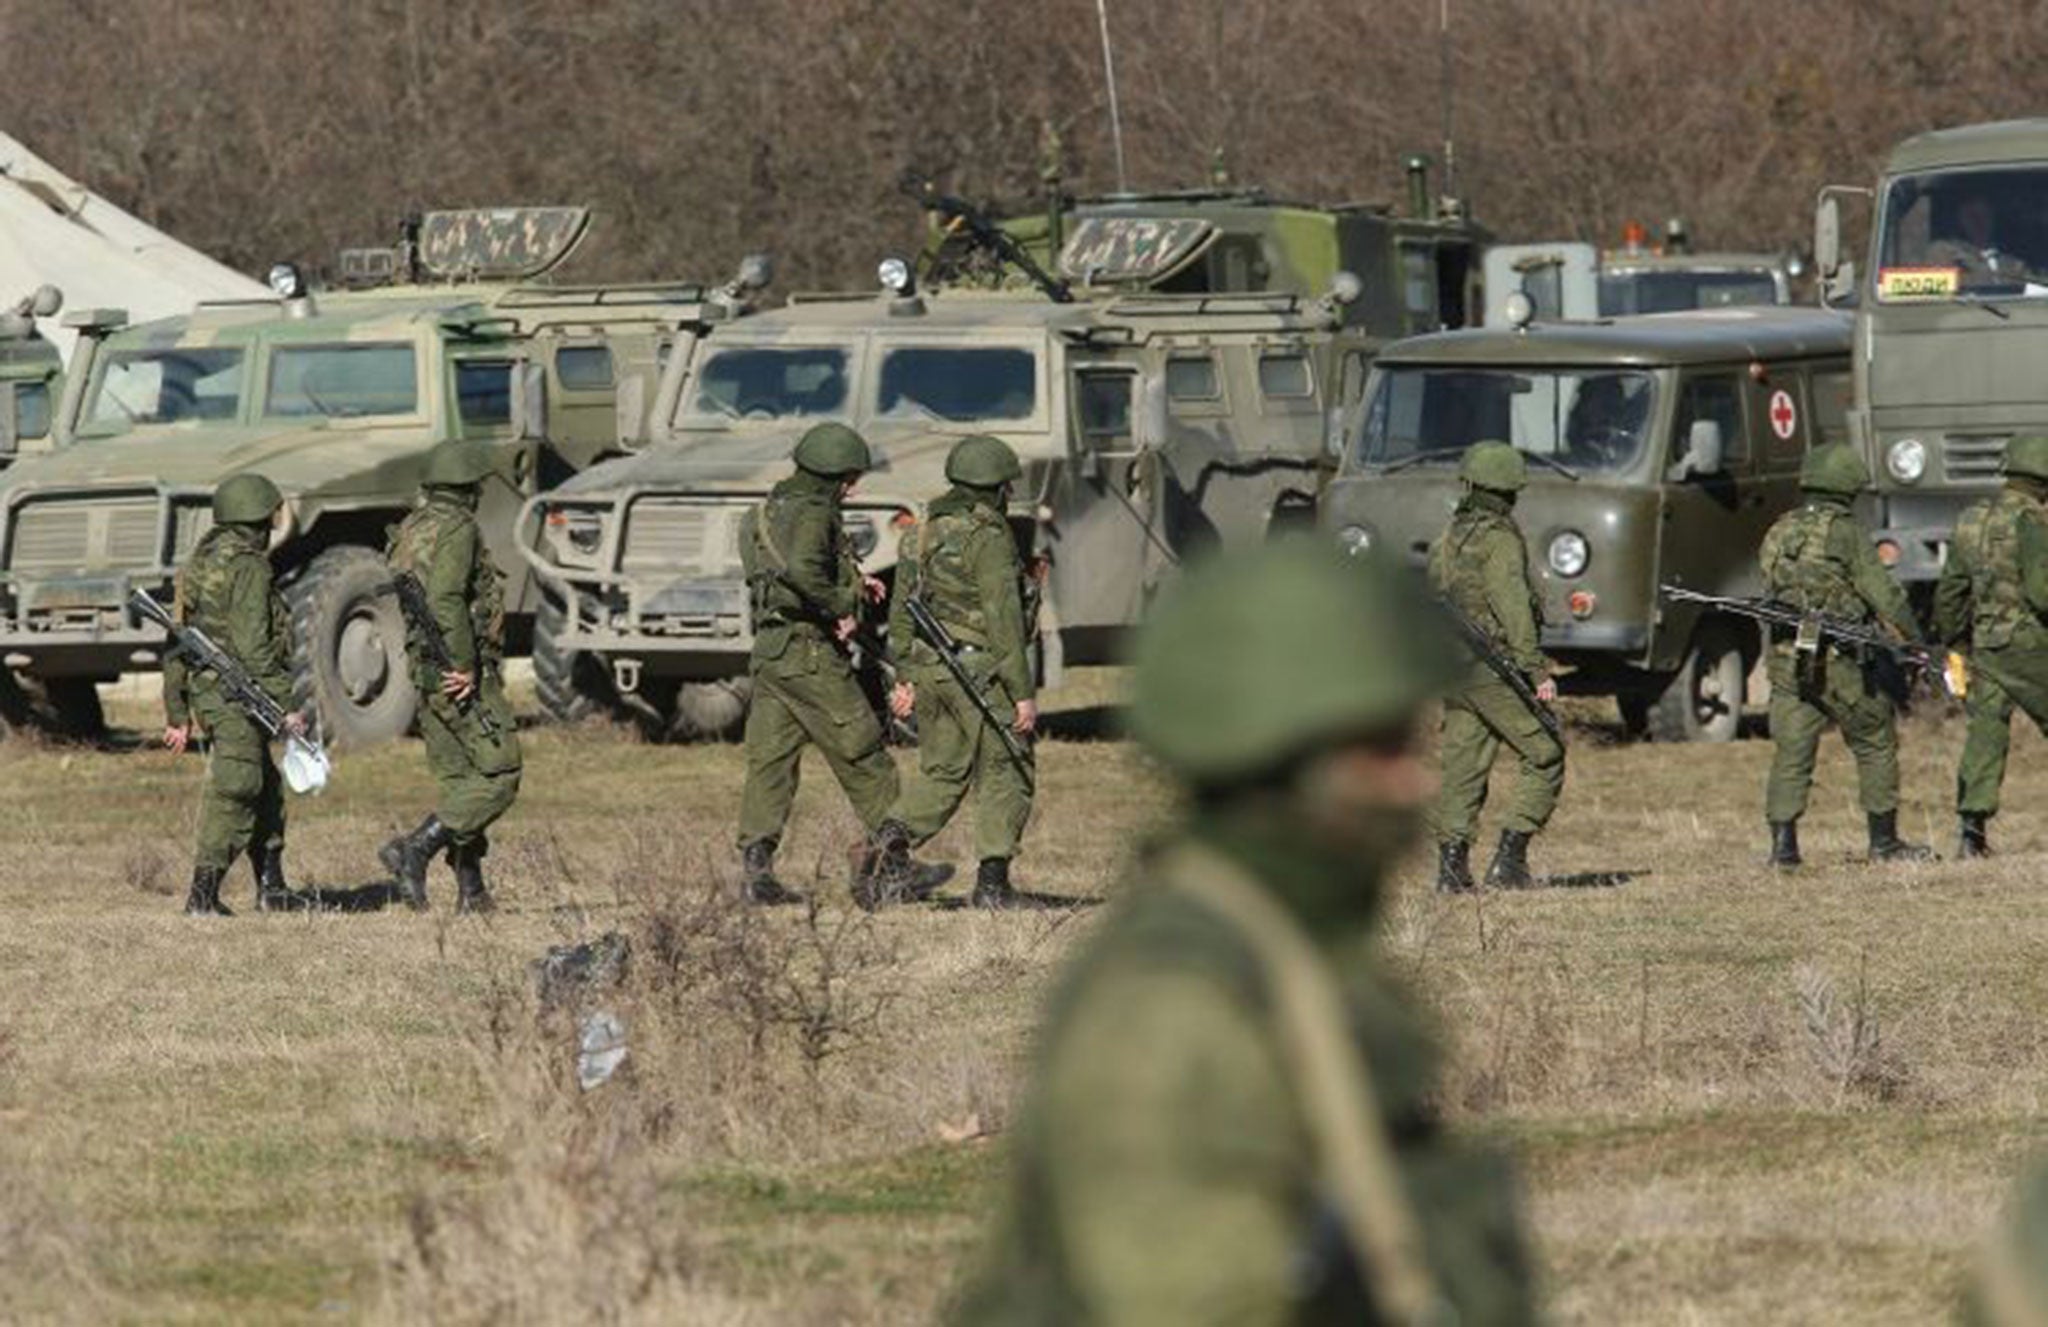 Unidentified heavily-armed soldiers – understood to be Russian troops unrelated to the incident– outside a Ukrainian military base in Crimea.